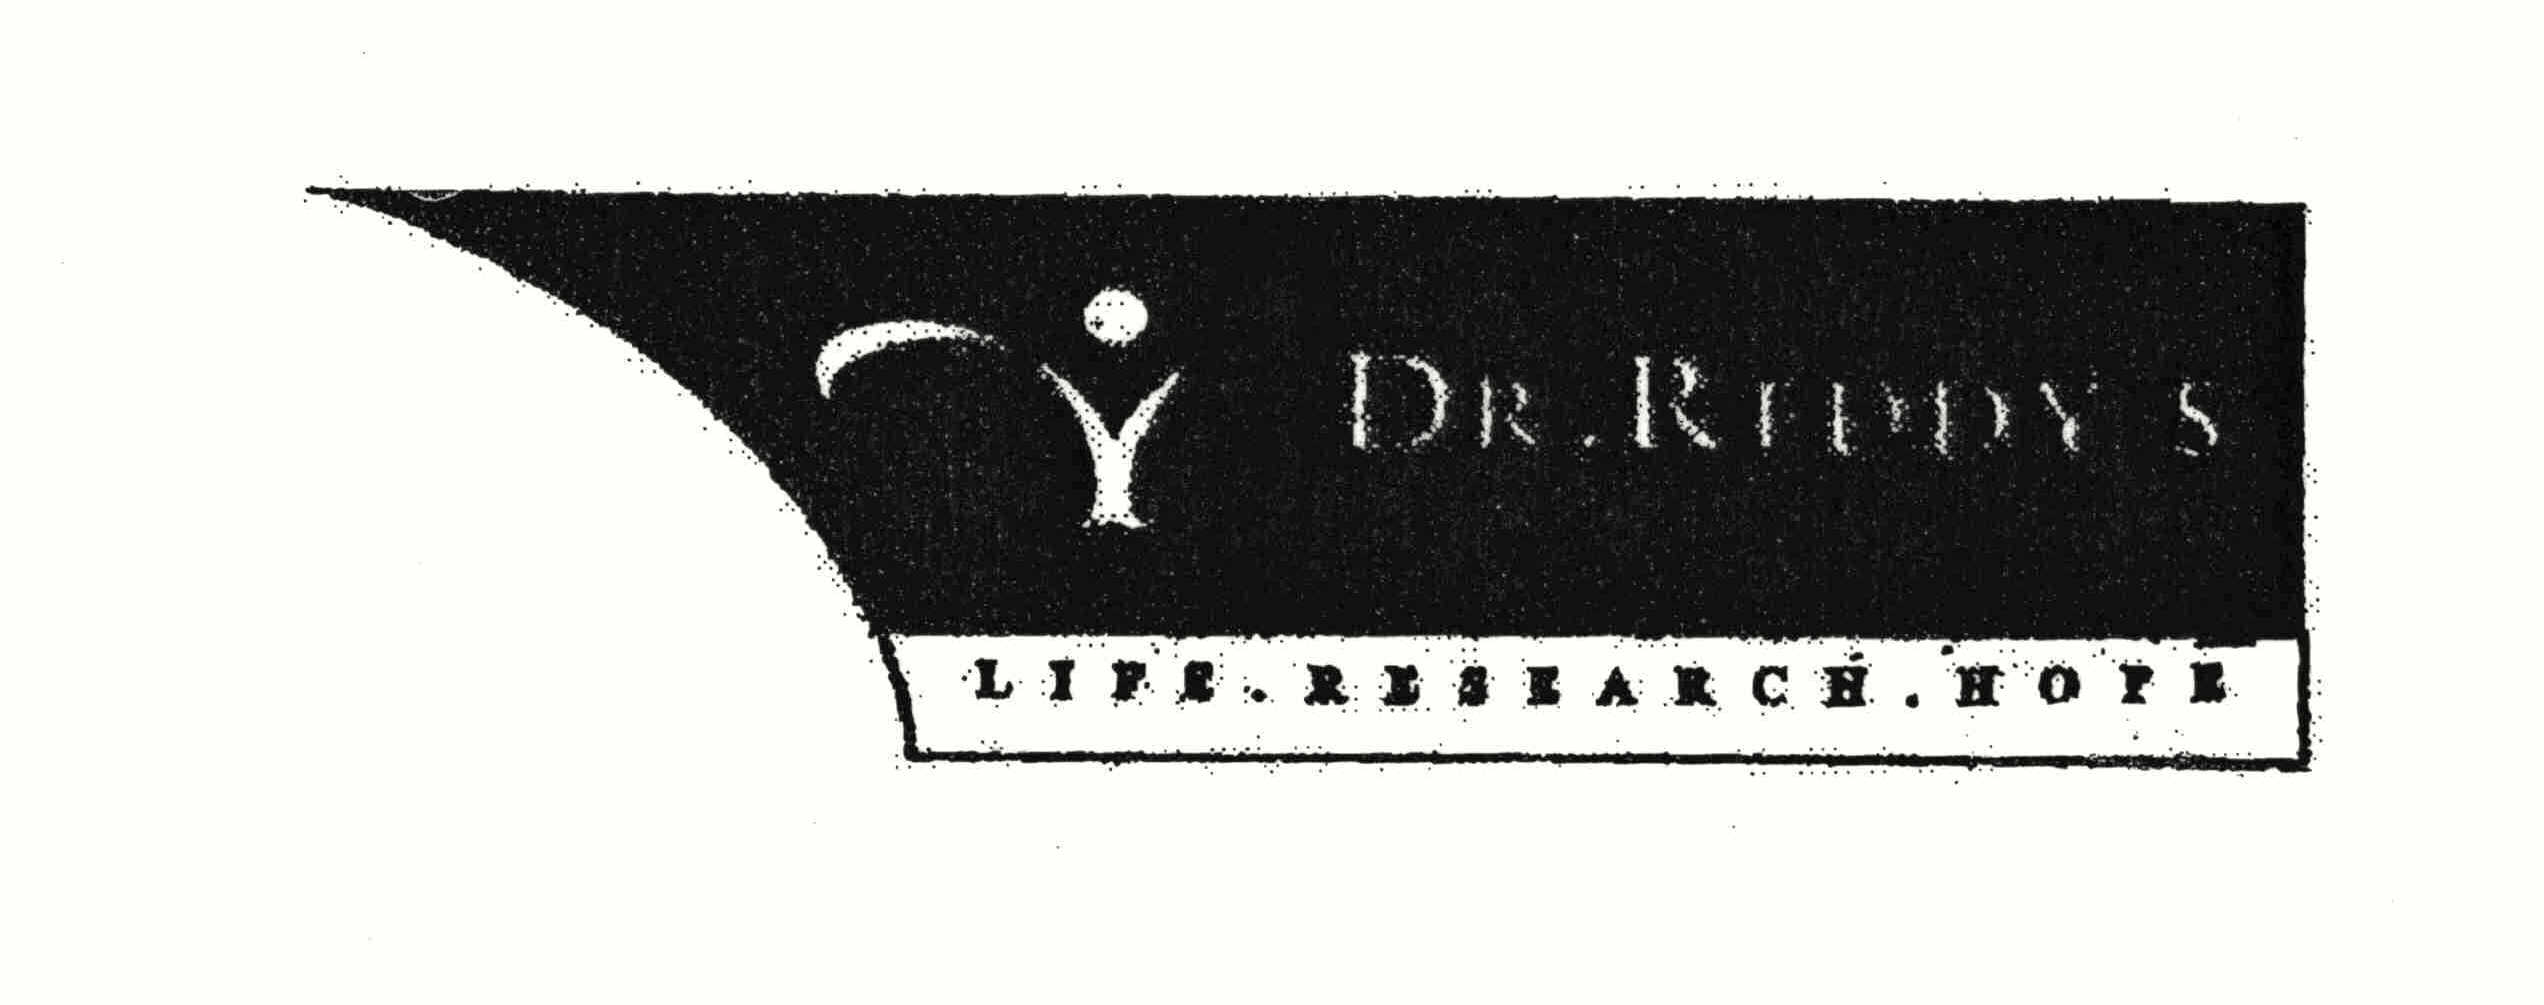 Trademark Logo DR. REDDY'S LIFE. RESEARCH. HOPE